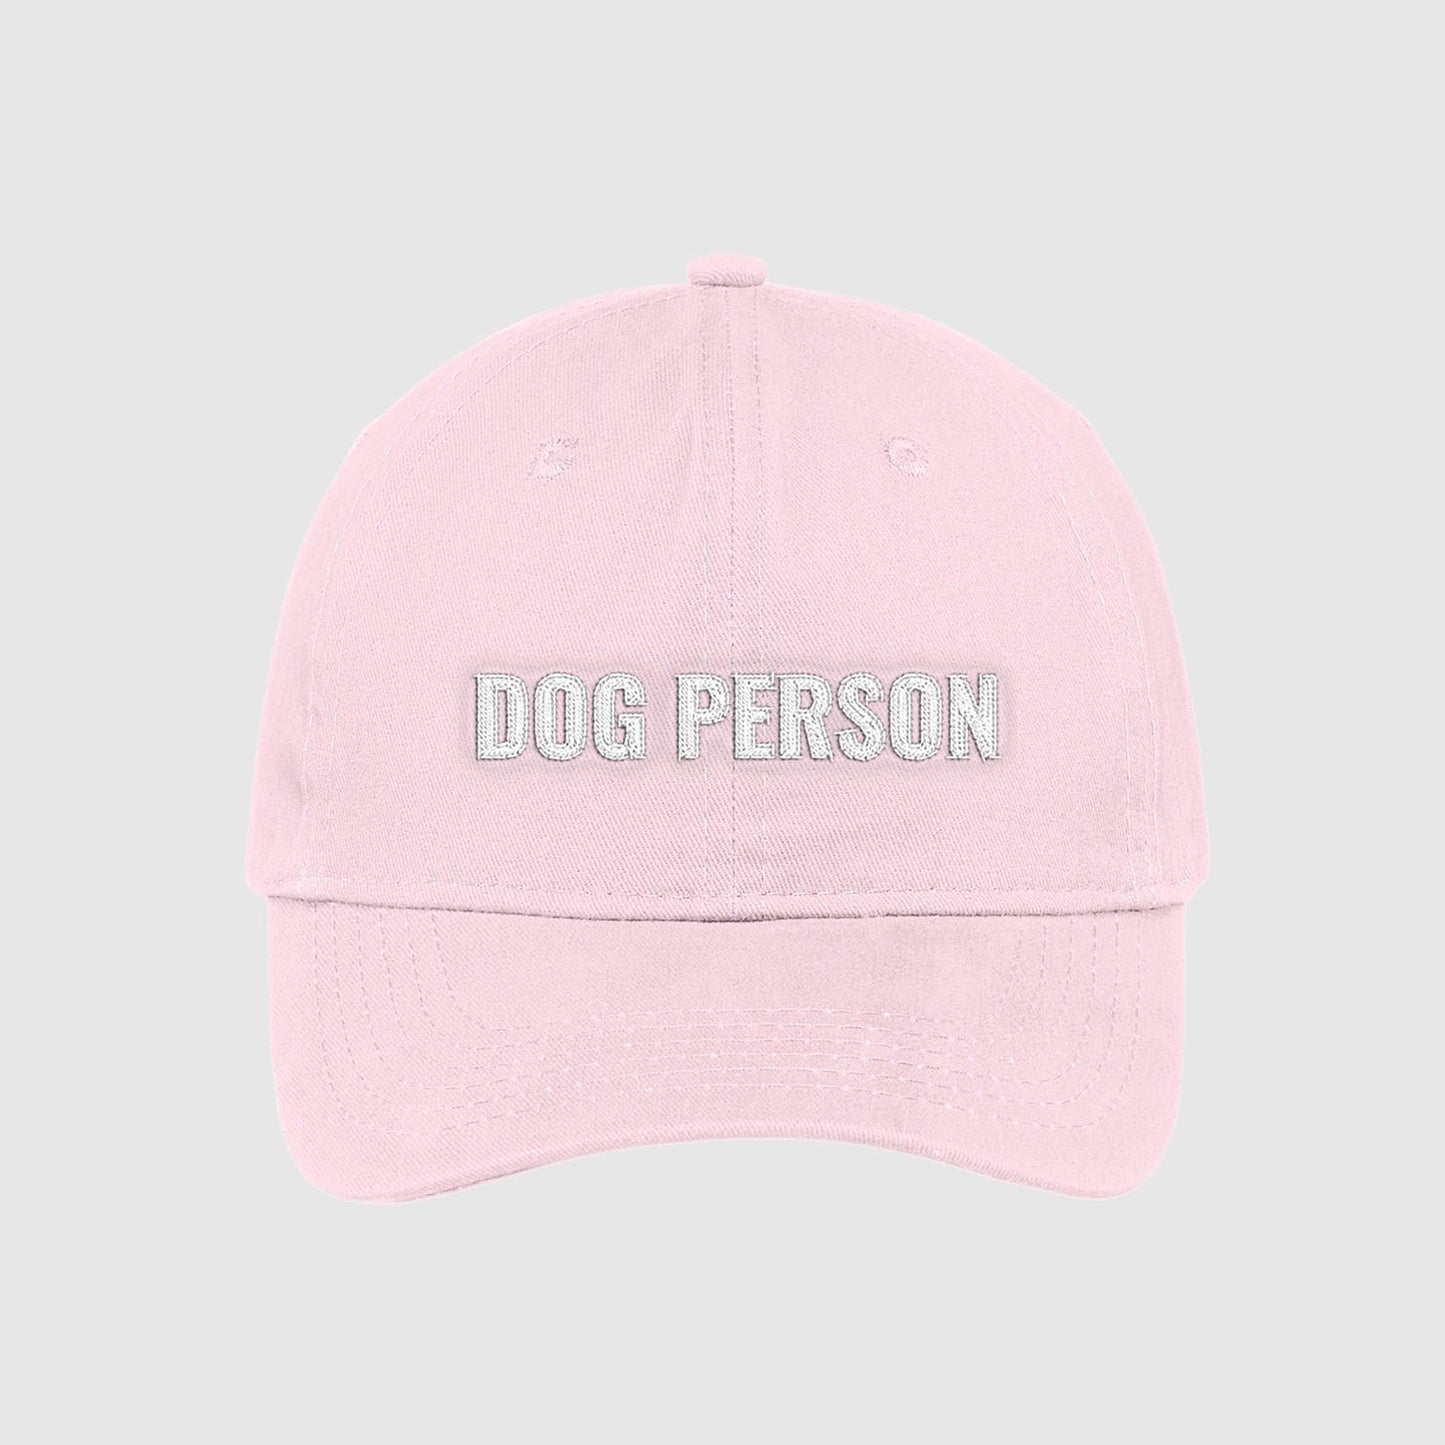 Blush light pink dad hat with Dog Person embroidered on the front with white thread.